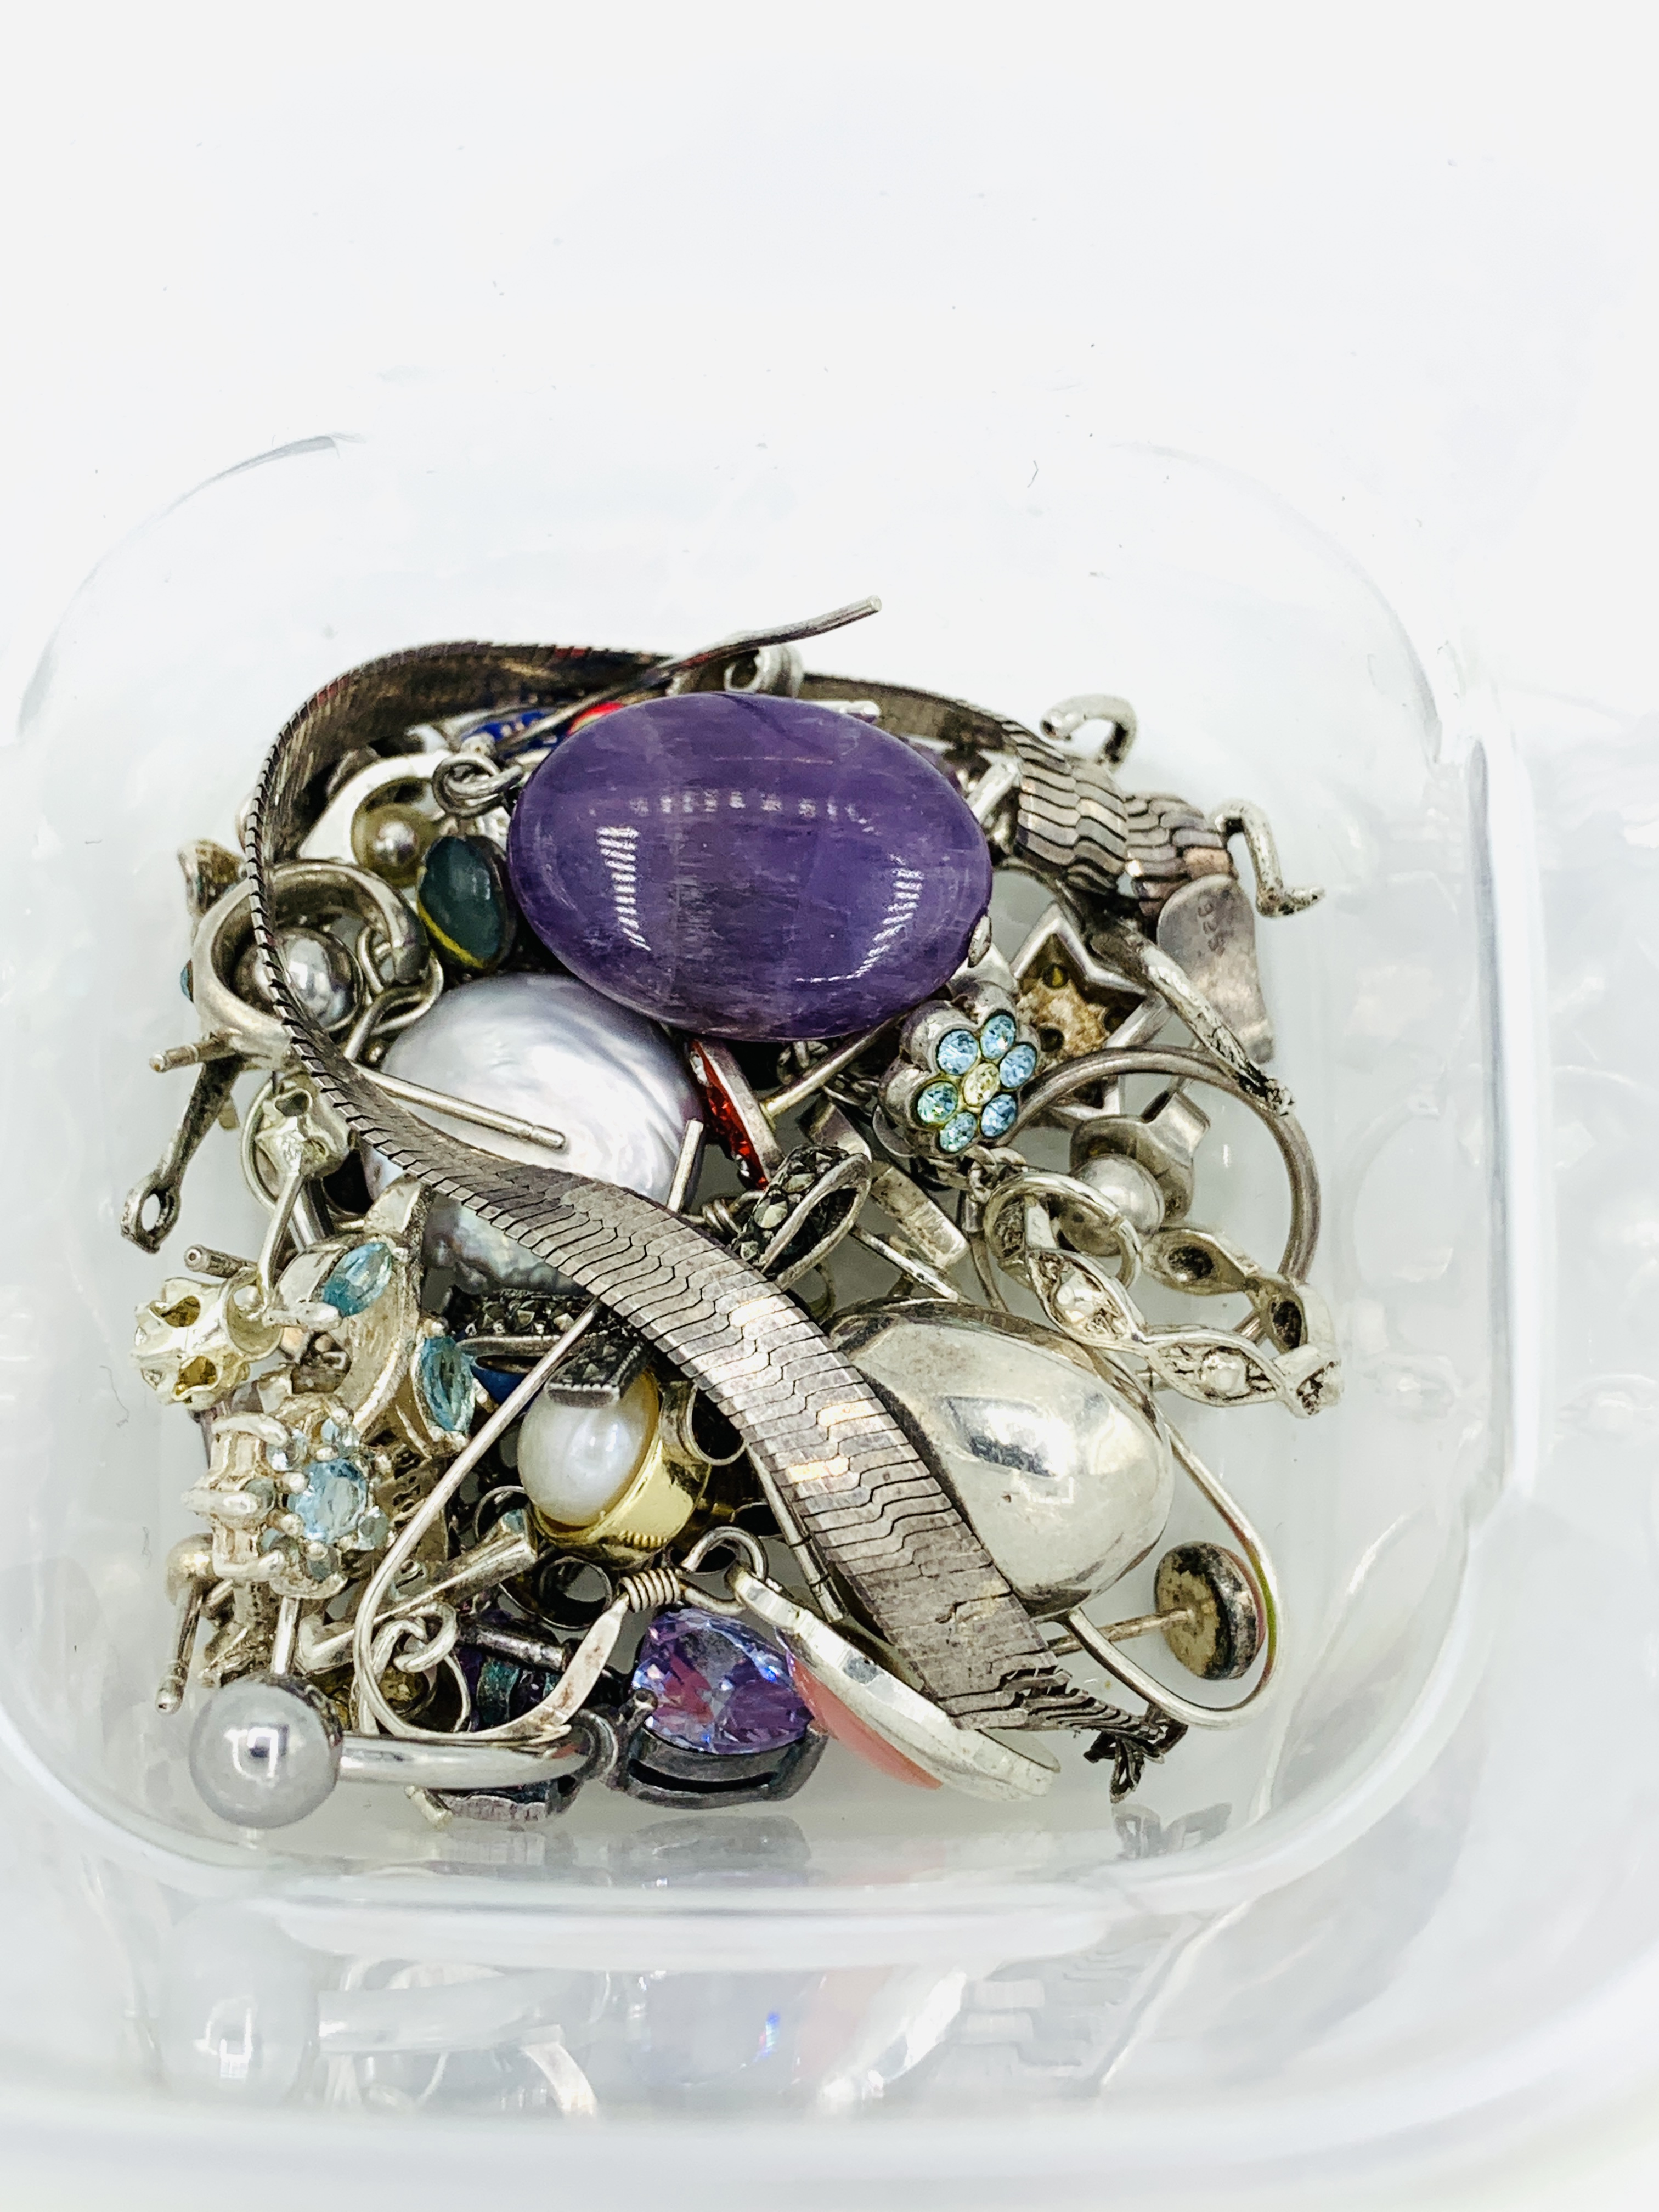 Quantity of 925 silver charms, pendants, and single earrings, some with stones - Image 2 of 3